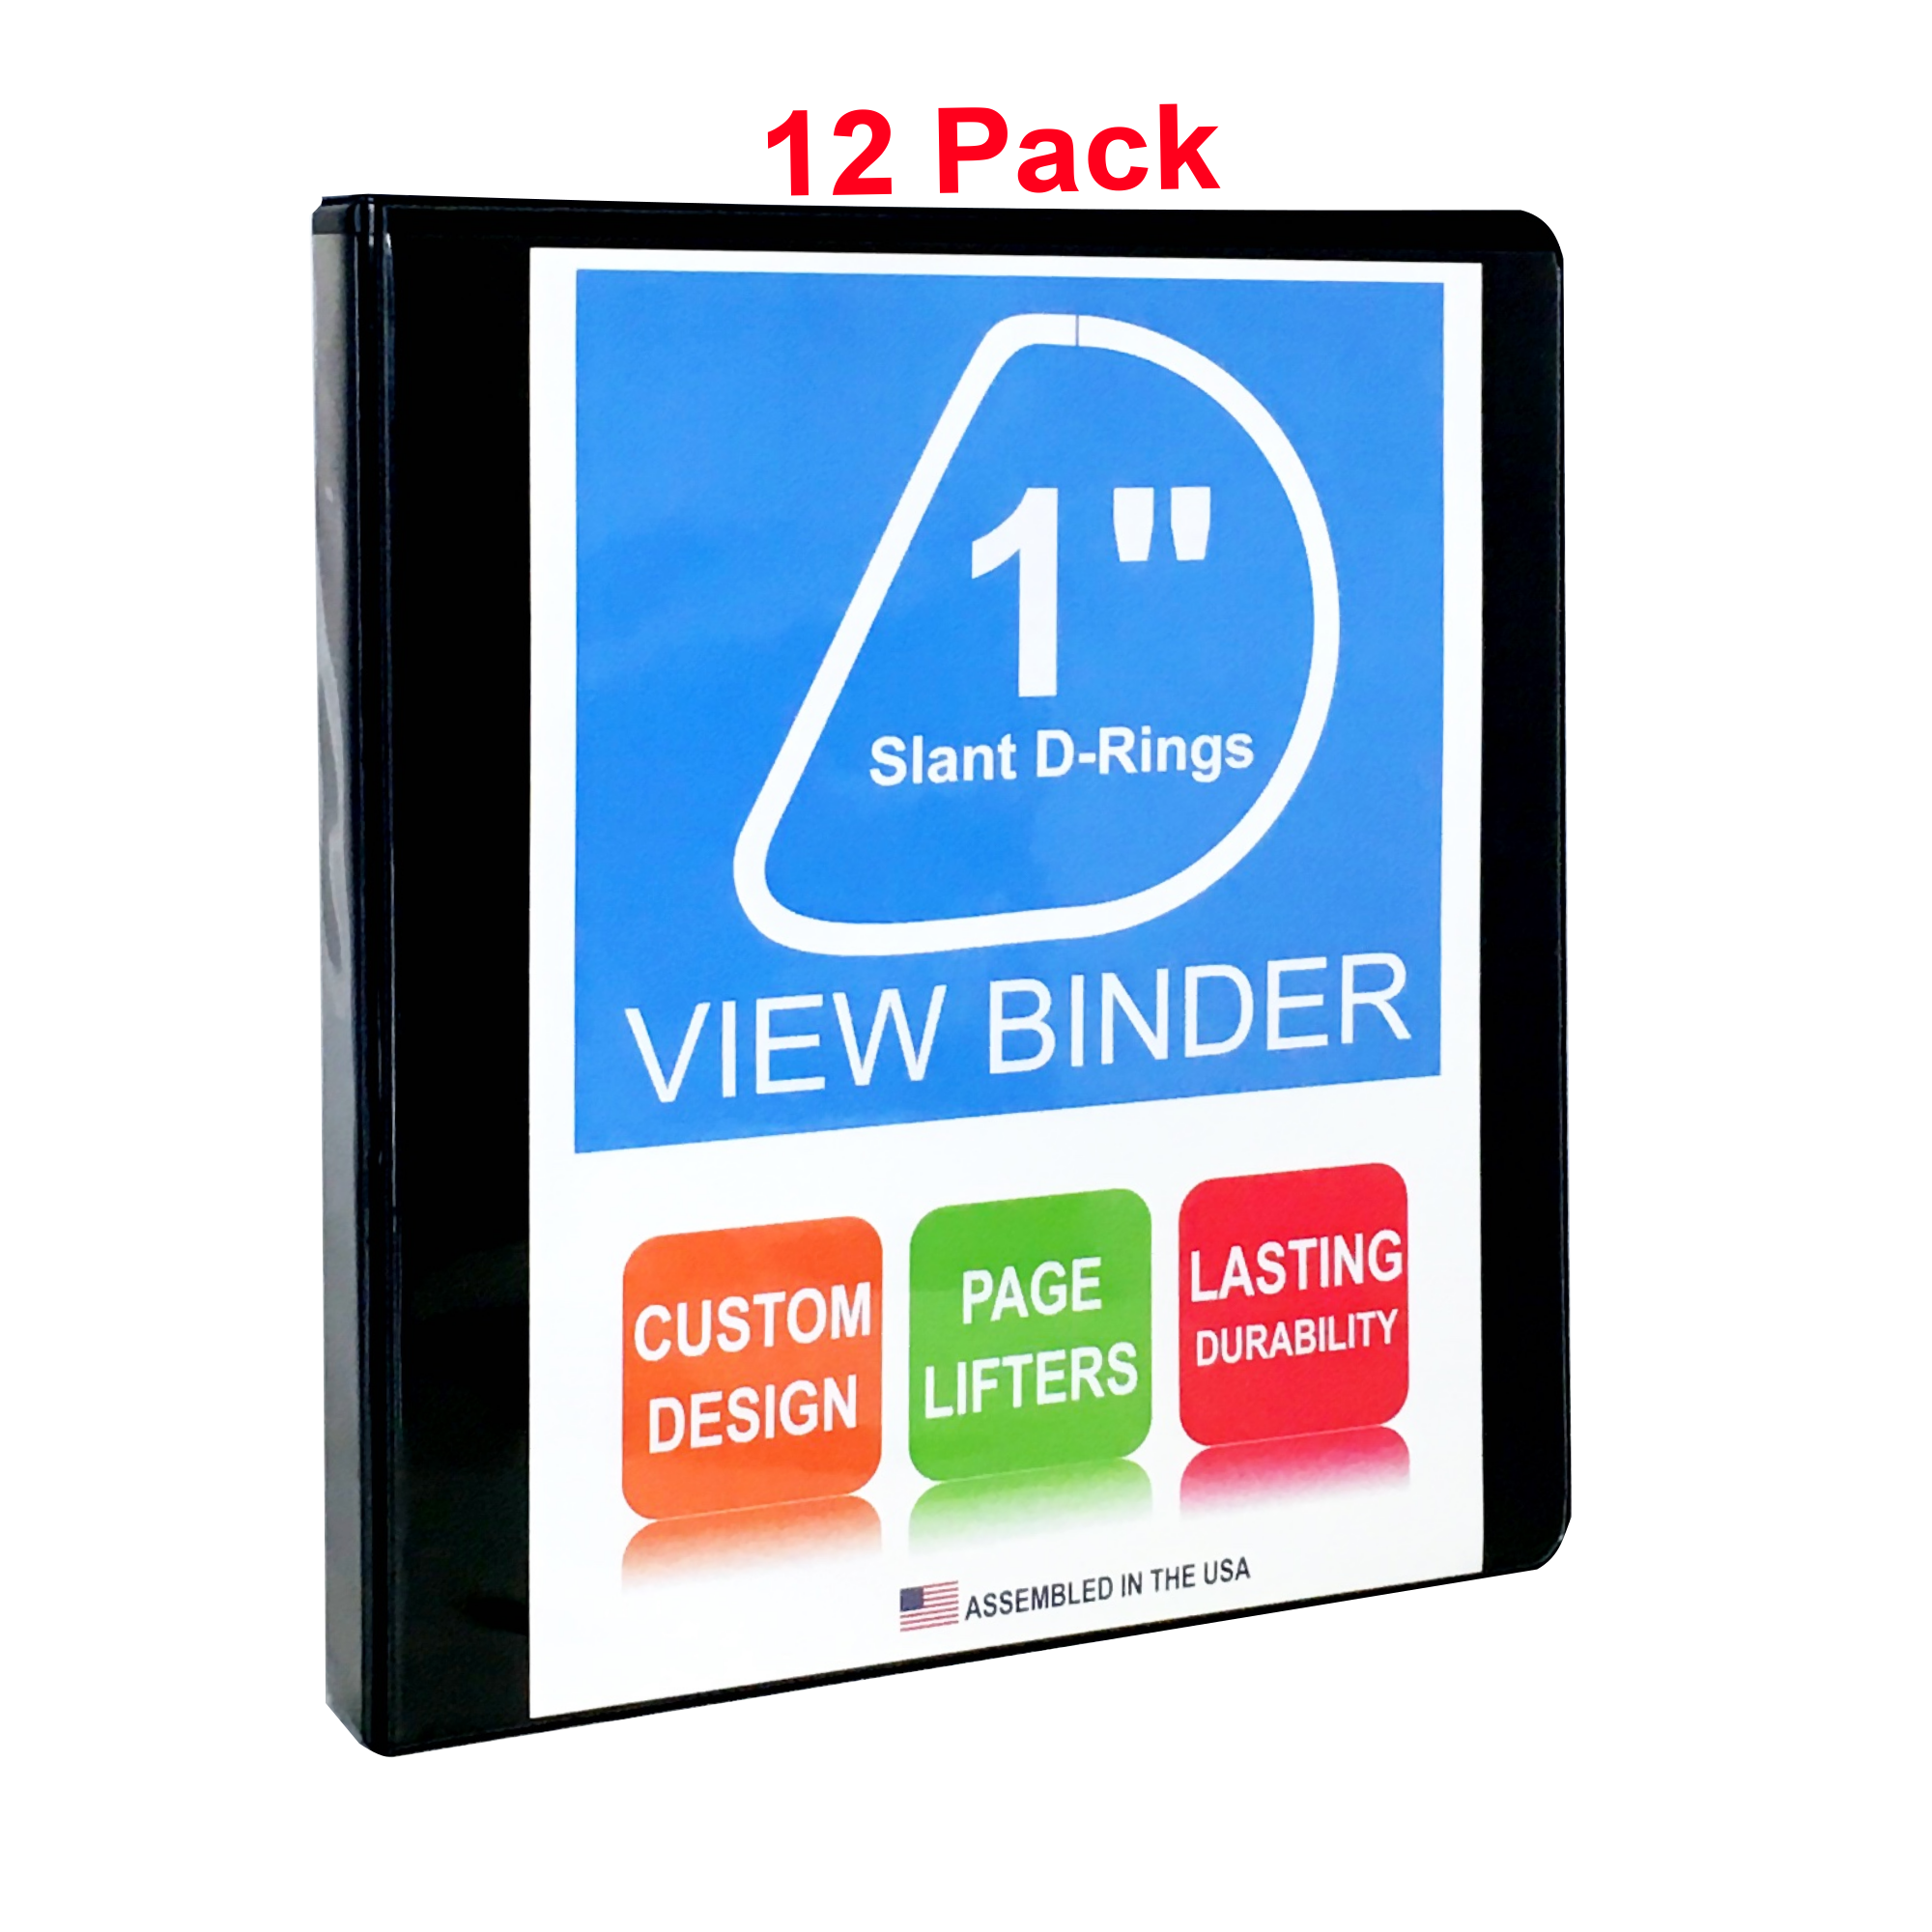 3 Ring Binders, 1.5 Inch, Slant D-Rings, White, Clear View, Pockets, 12 Pack - RingBinderDepot.com